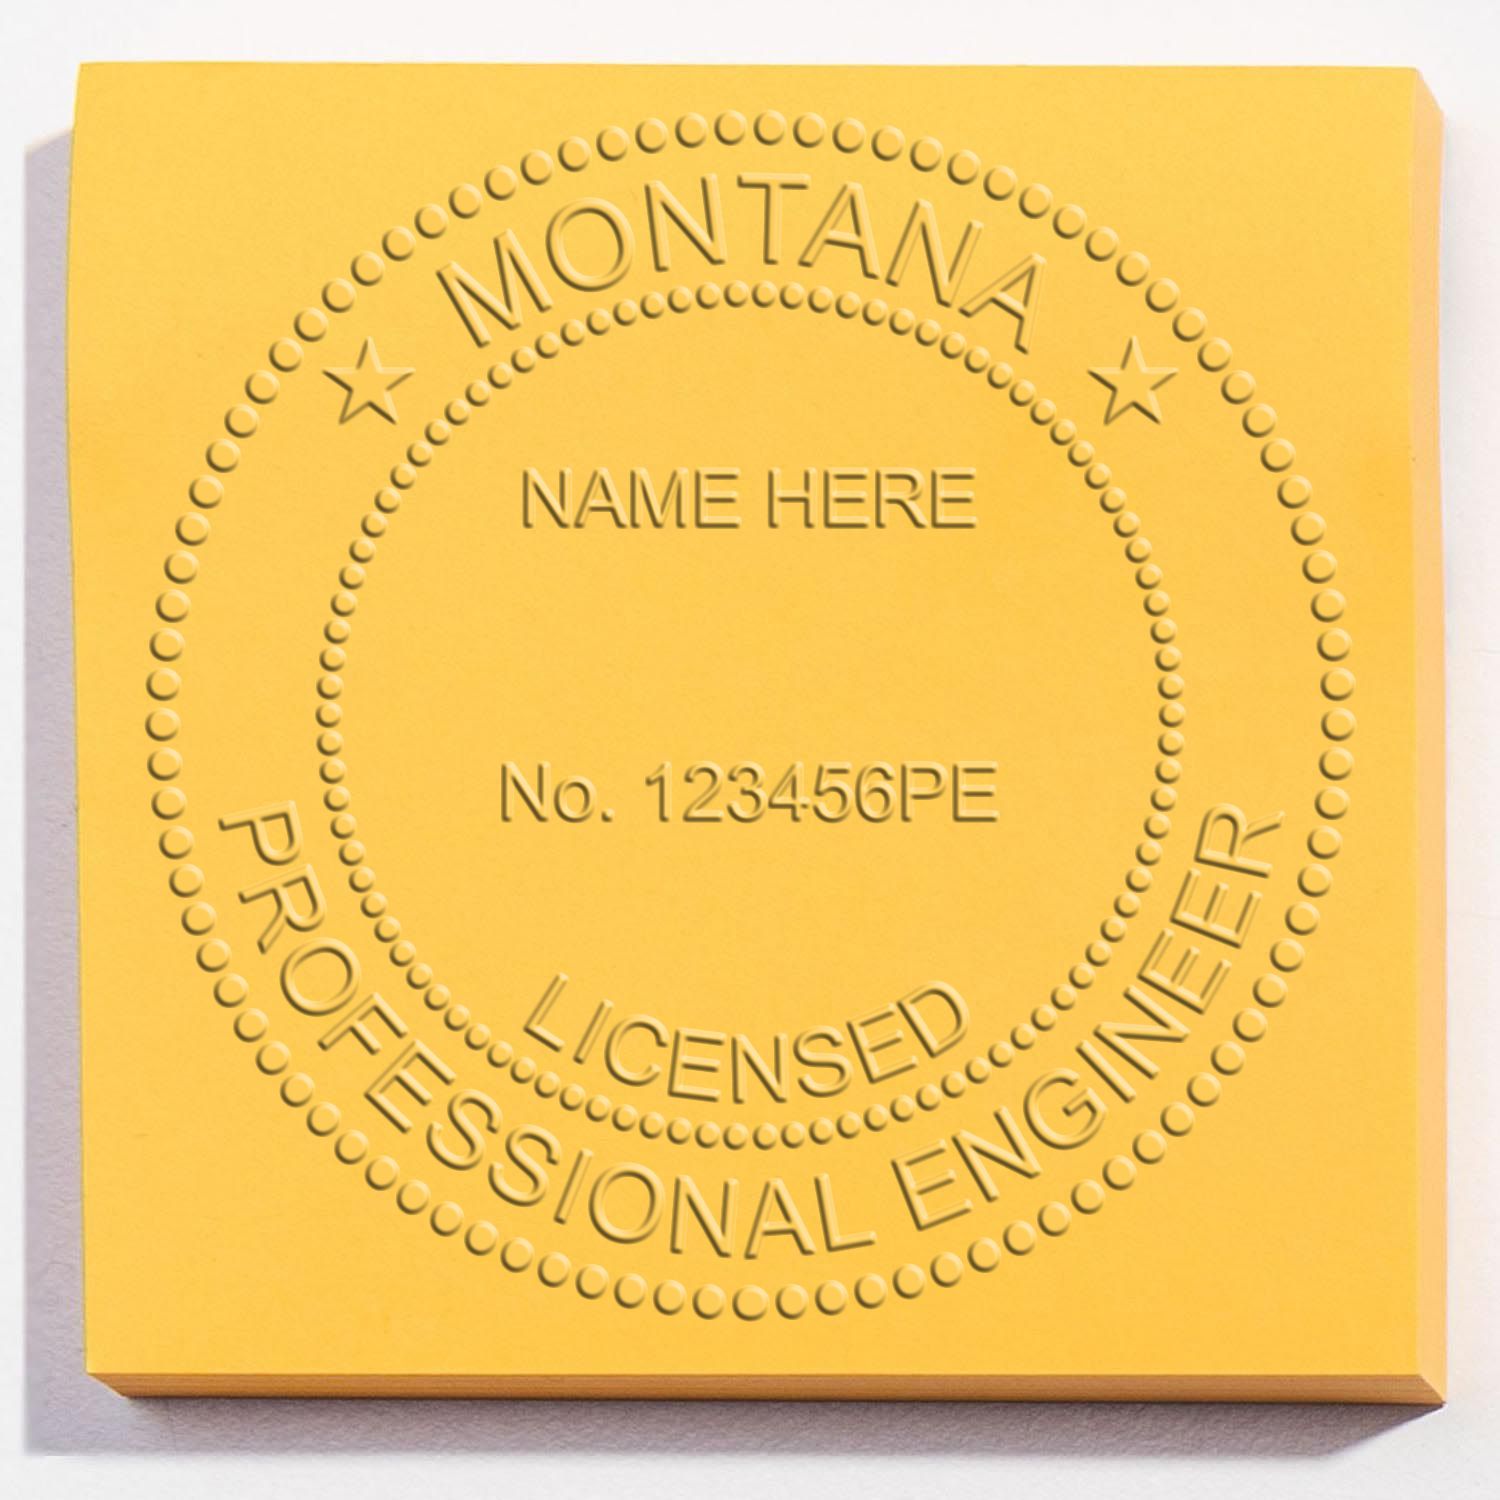 A lifestyle photo showing a stamped image of the Handheld Montana Professional Engineer Embosser on a piece of paper